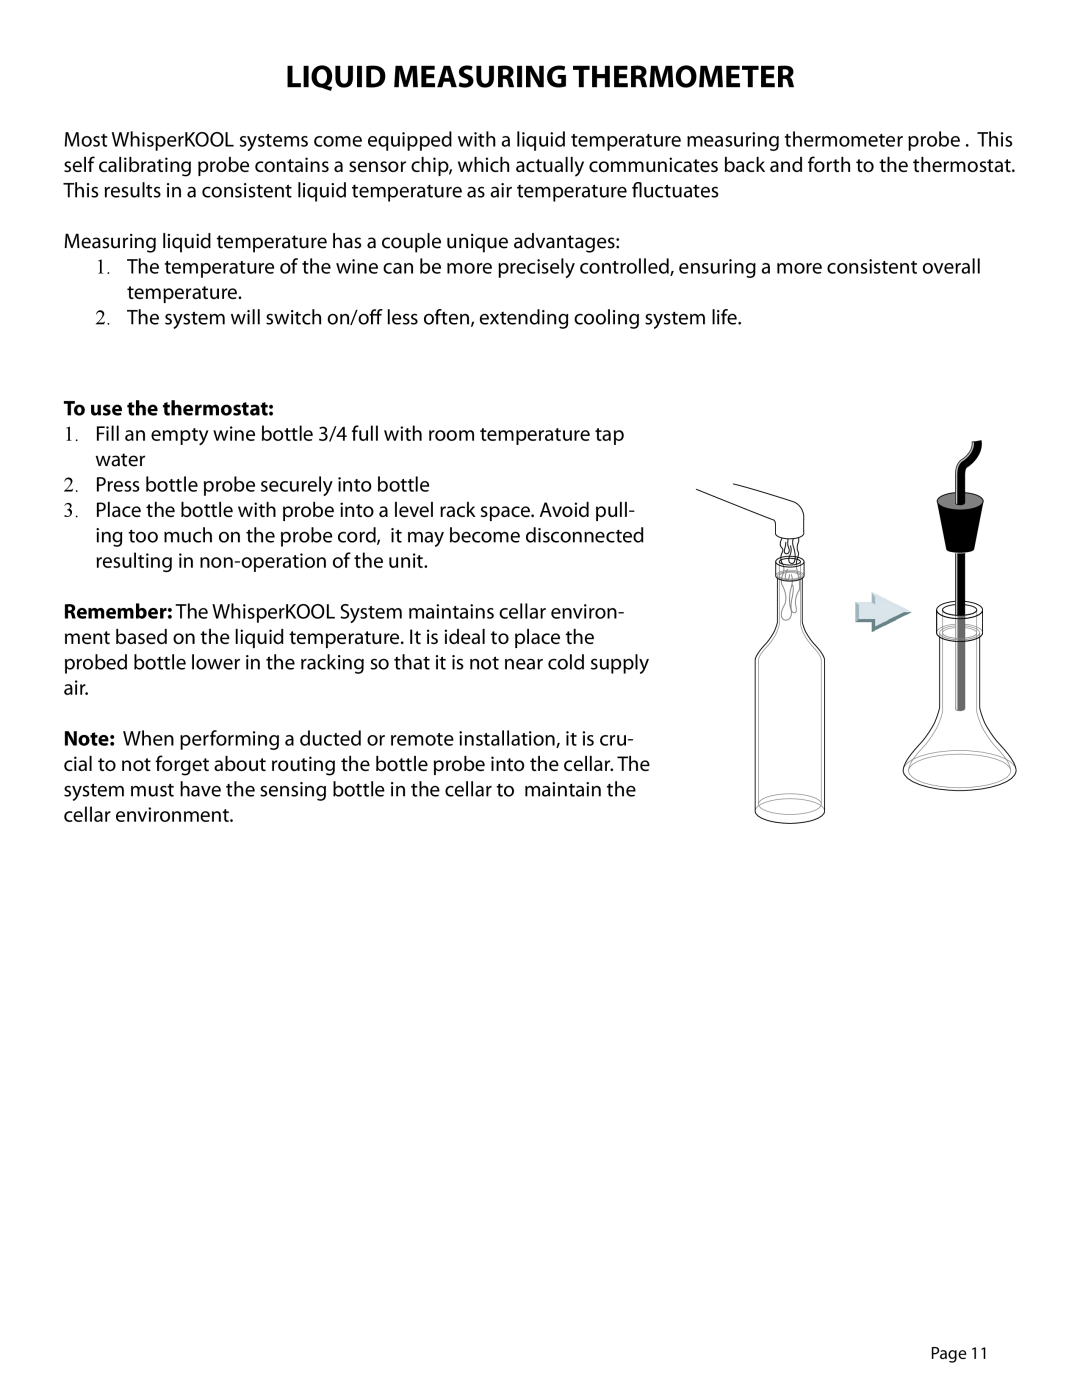 WhisperKool 081310, GSM-01 owner manual Liquid Measuring Thermometer, To use the thermostat 